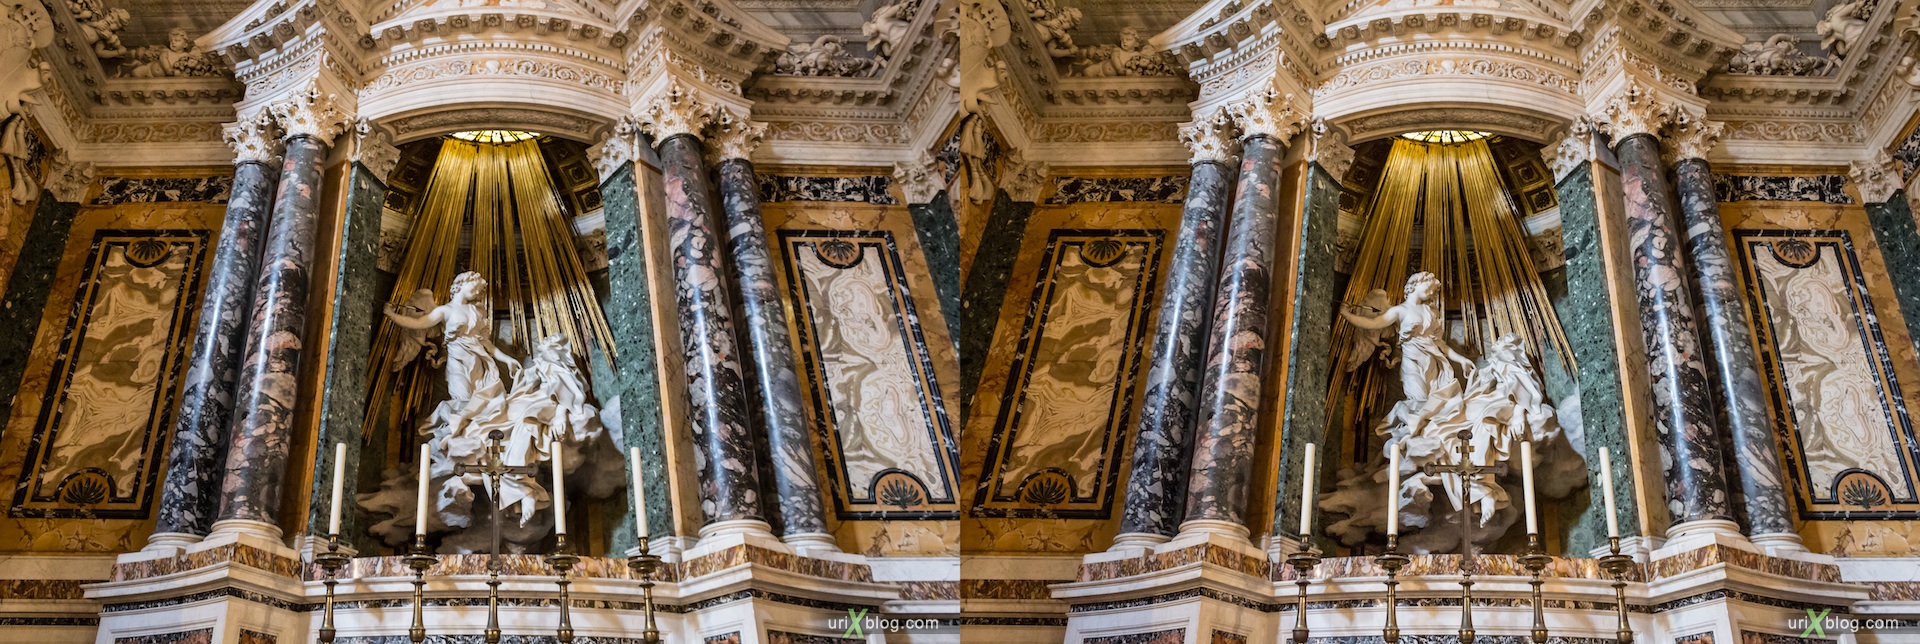 2012, Santa Maria della Vittoria church, Rome, Italy, cathedral, monastery, Christianity, Catholicism, 3D, stereo pair, cross-eyed, crossview, cross view stereo pair